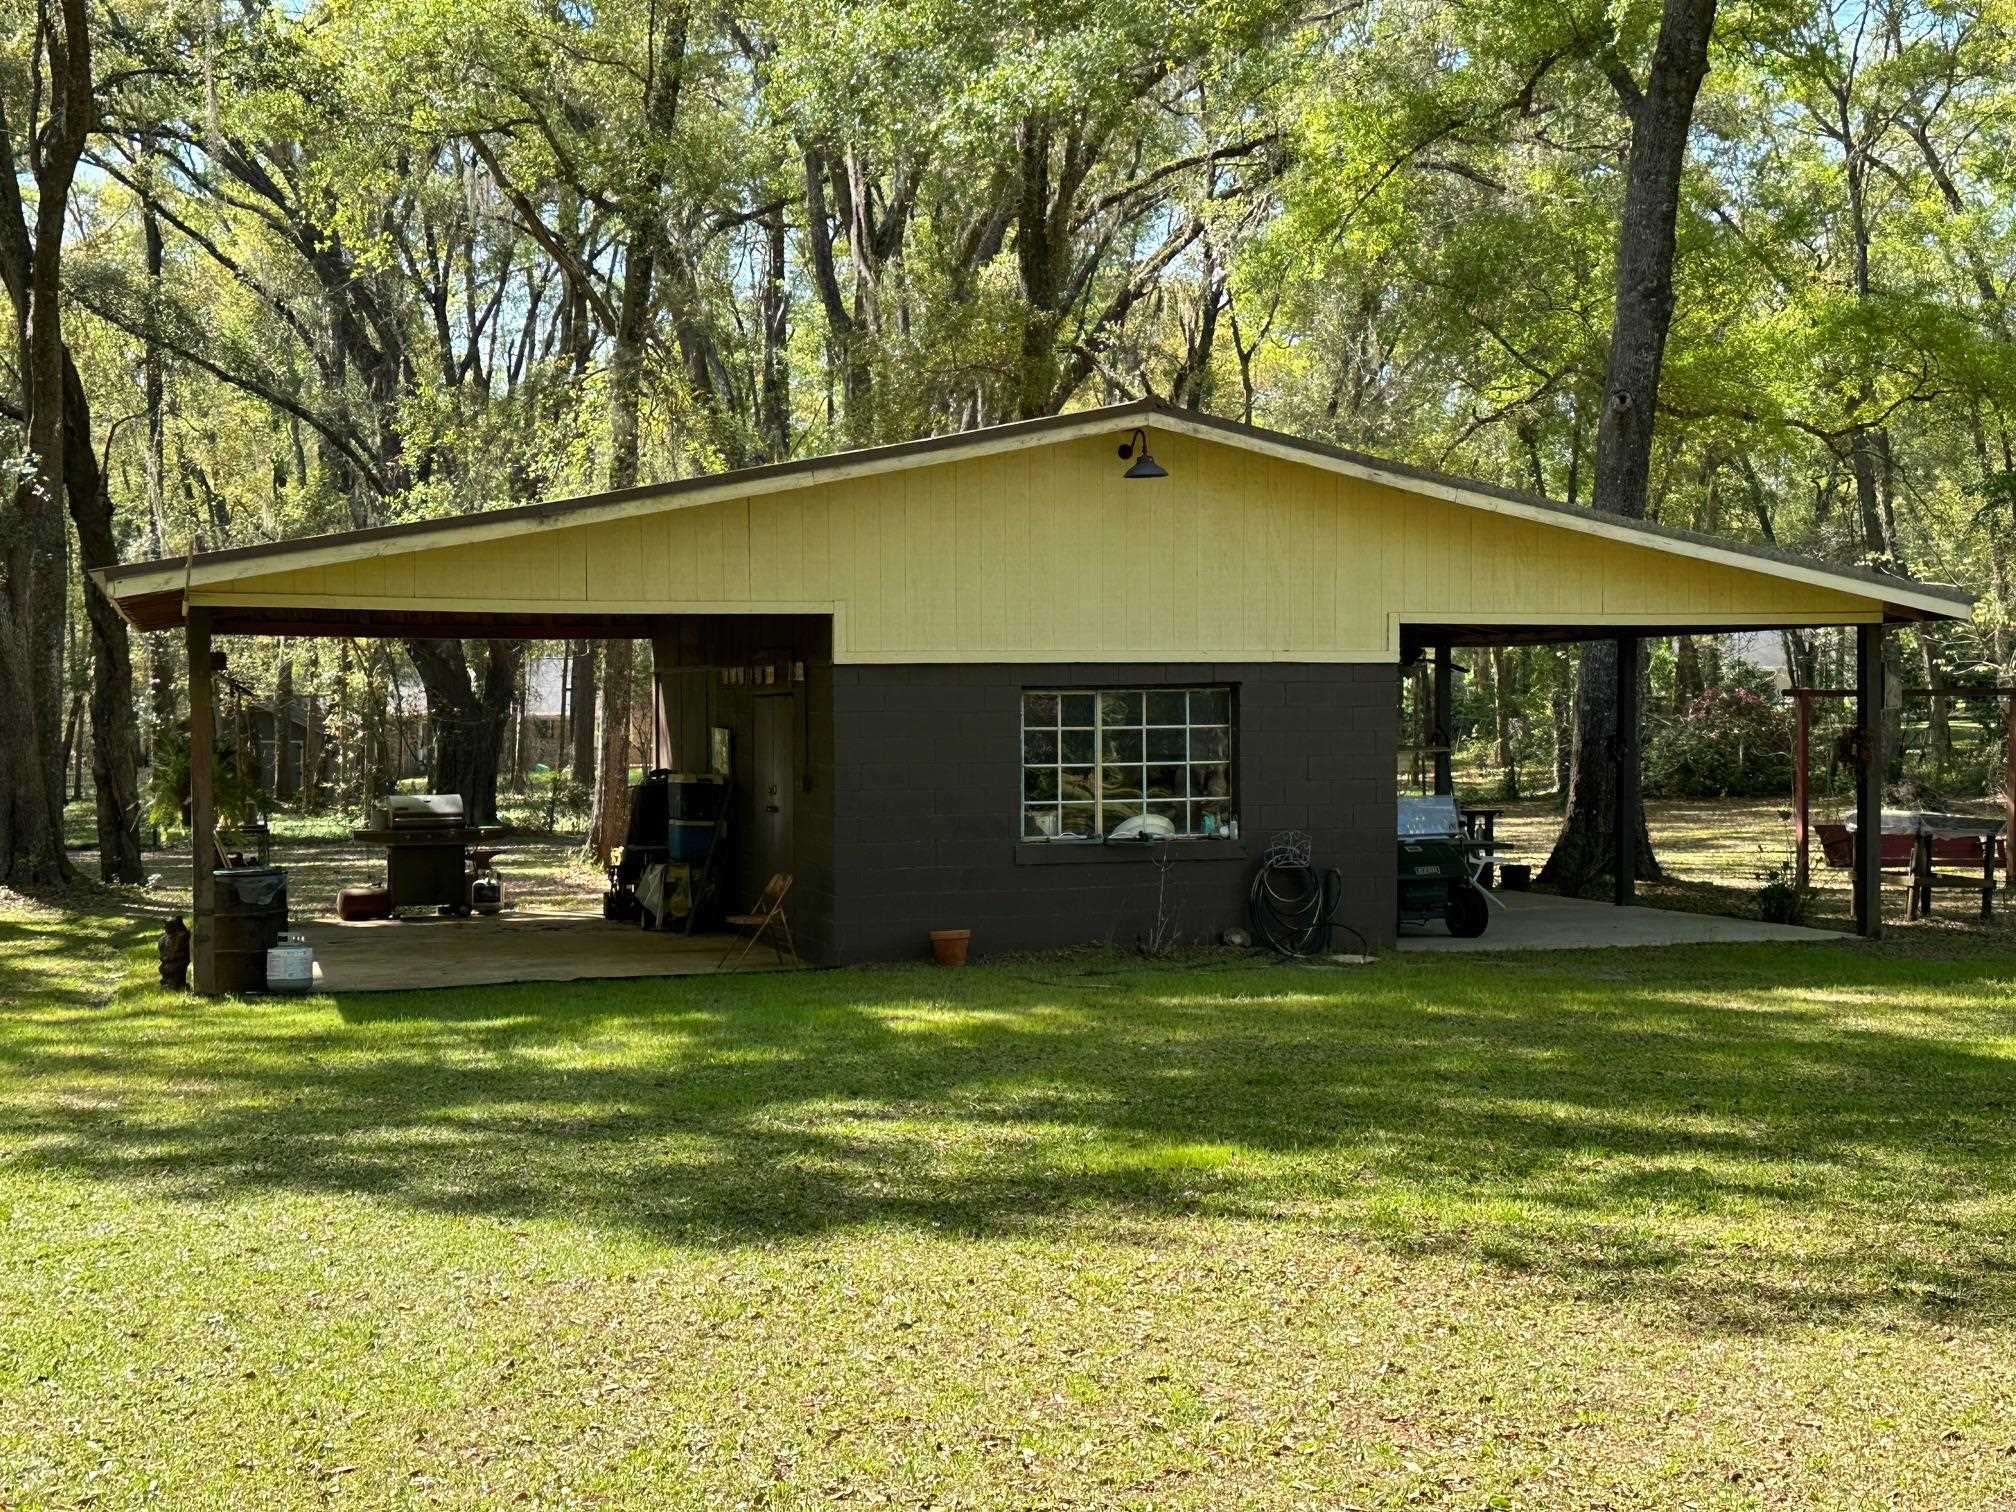 2024 HILL N DALE Street,TALLAHASSEE,Florida 32317,4 Bedrooms Bedrooms,2 BathroomsBathrooms,Detached single family,2024 HILL N DALE Street,369882